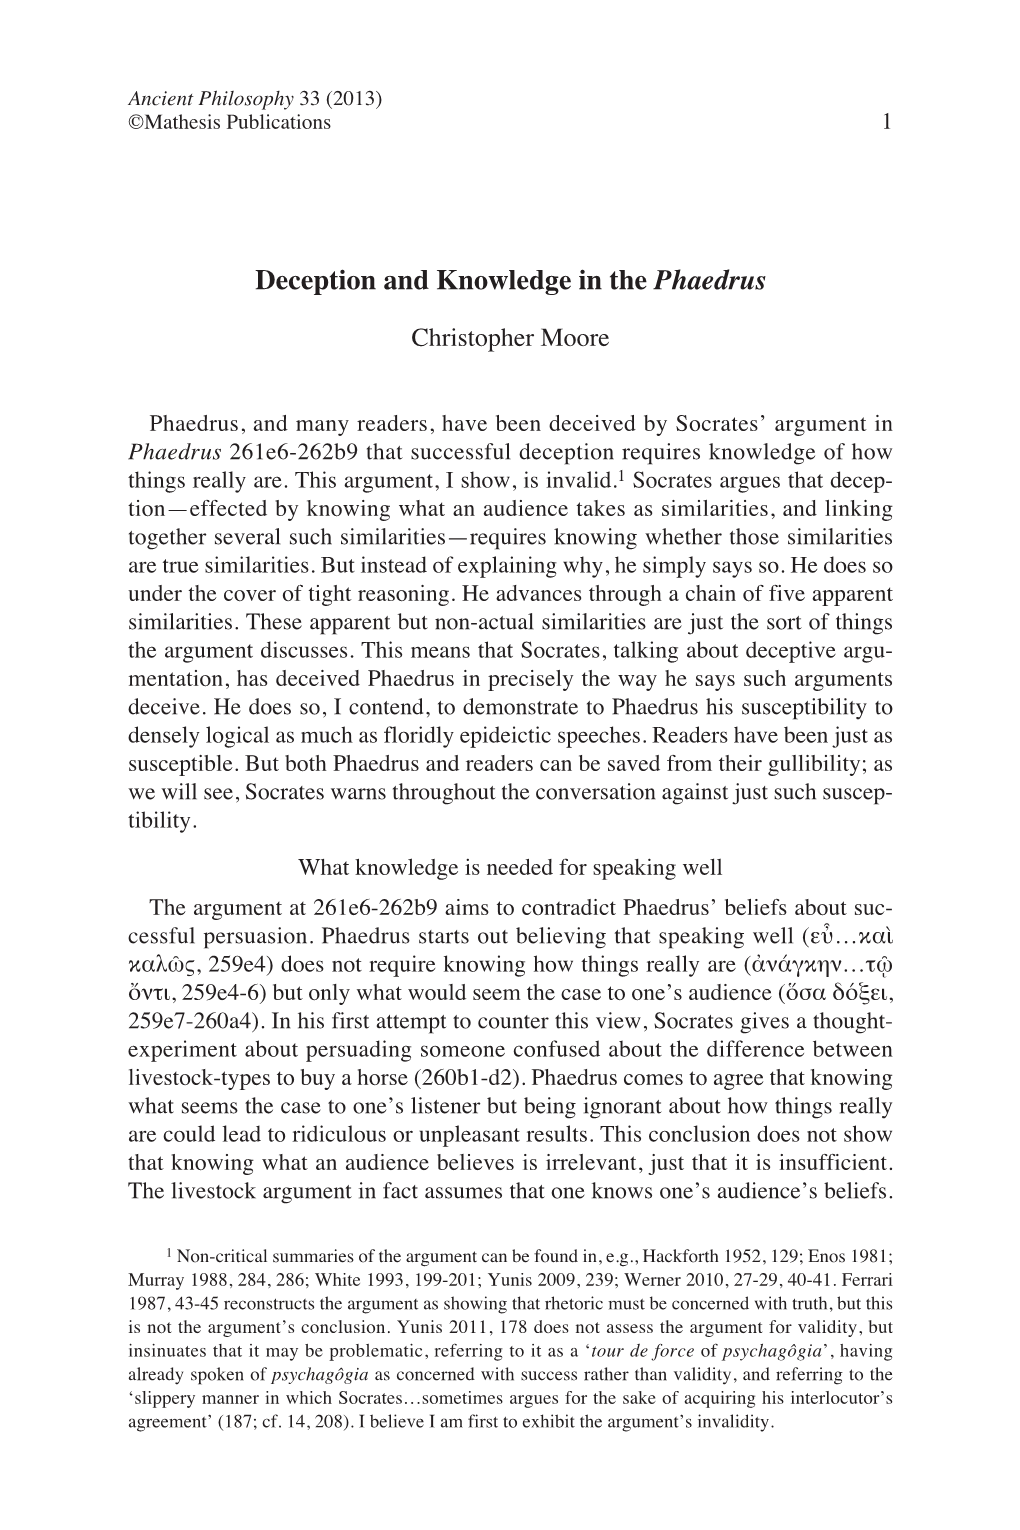 Deception and Knowledge in the Phaedrus